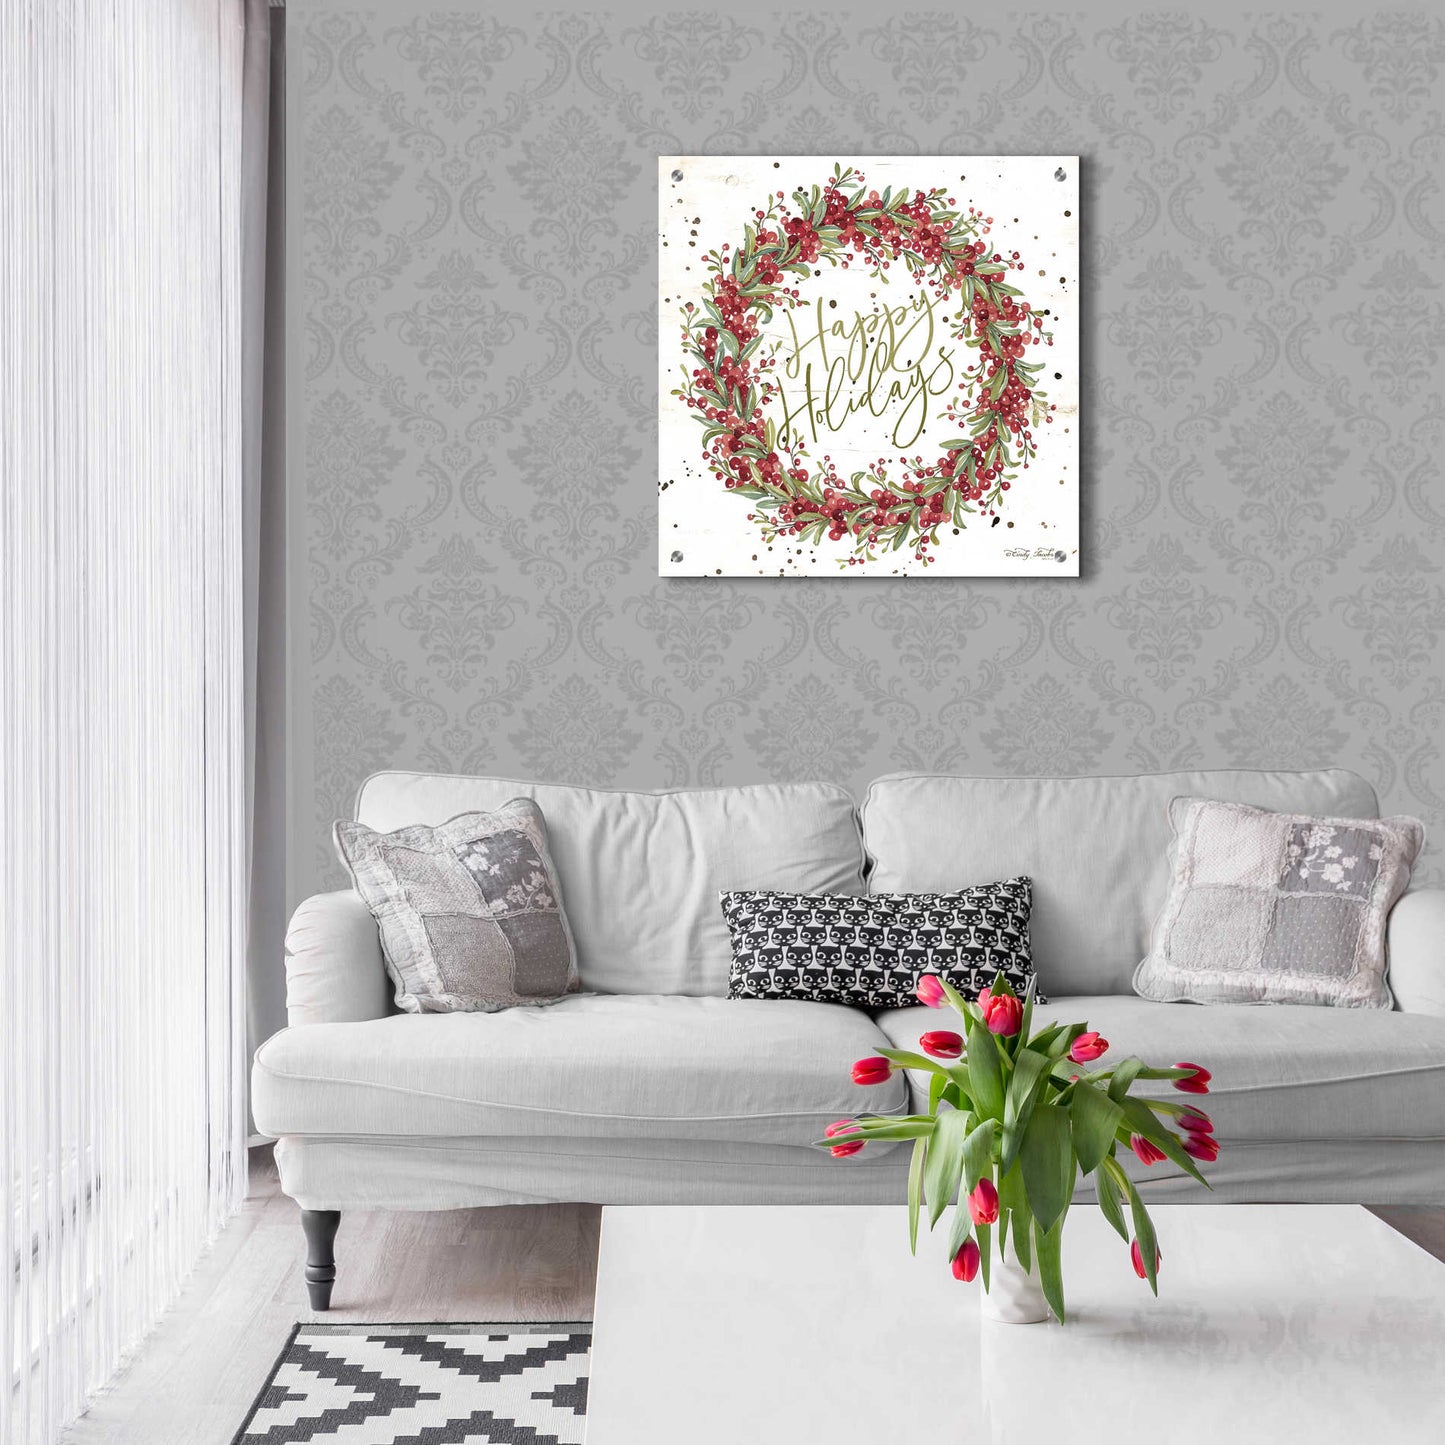 Epic Art 'Happy Holidays Berry Wreath' by Cindy Jacobs, Acrylic Glass Wall Art,24x24